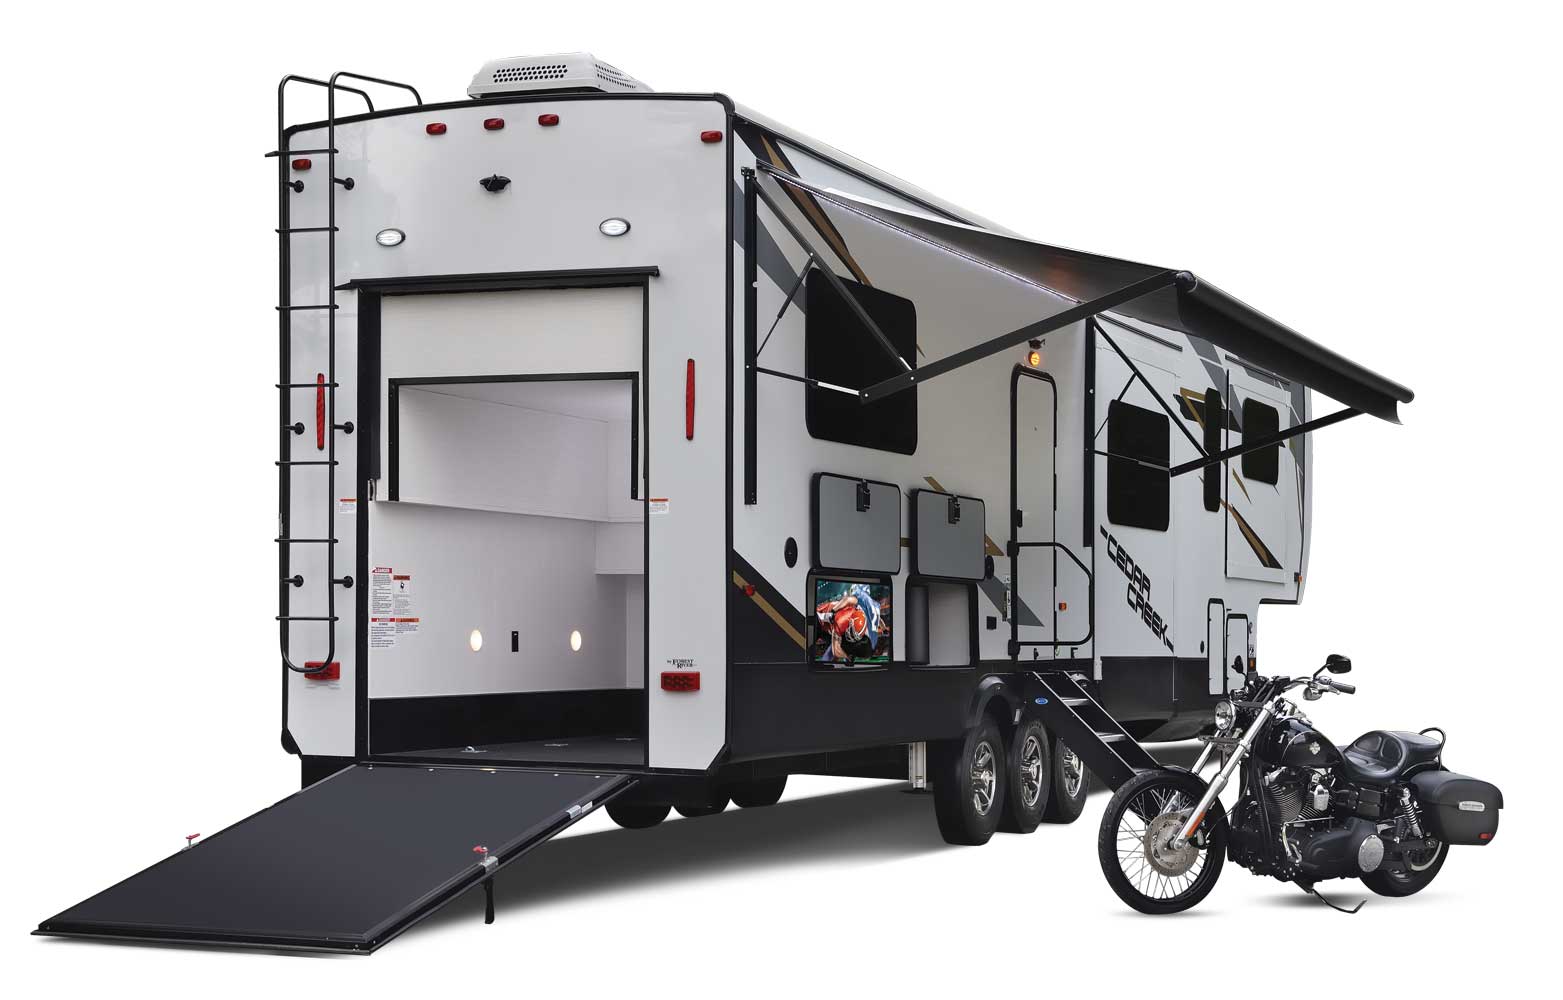 https://s1.cdn.autoevolution.com/images/news/gallery/cedar-creek-s-385th-fifth-wheel-stands-out-with-a-luscious-interior-and-a-toy-garage_1.jpg